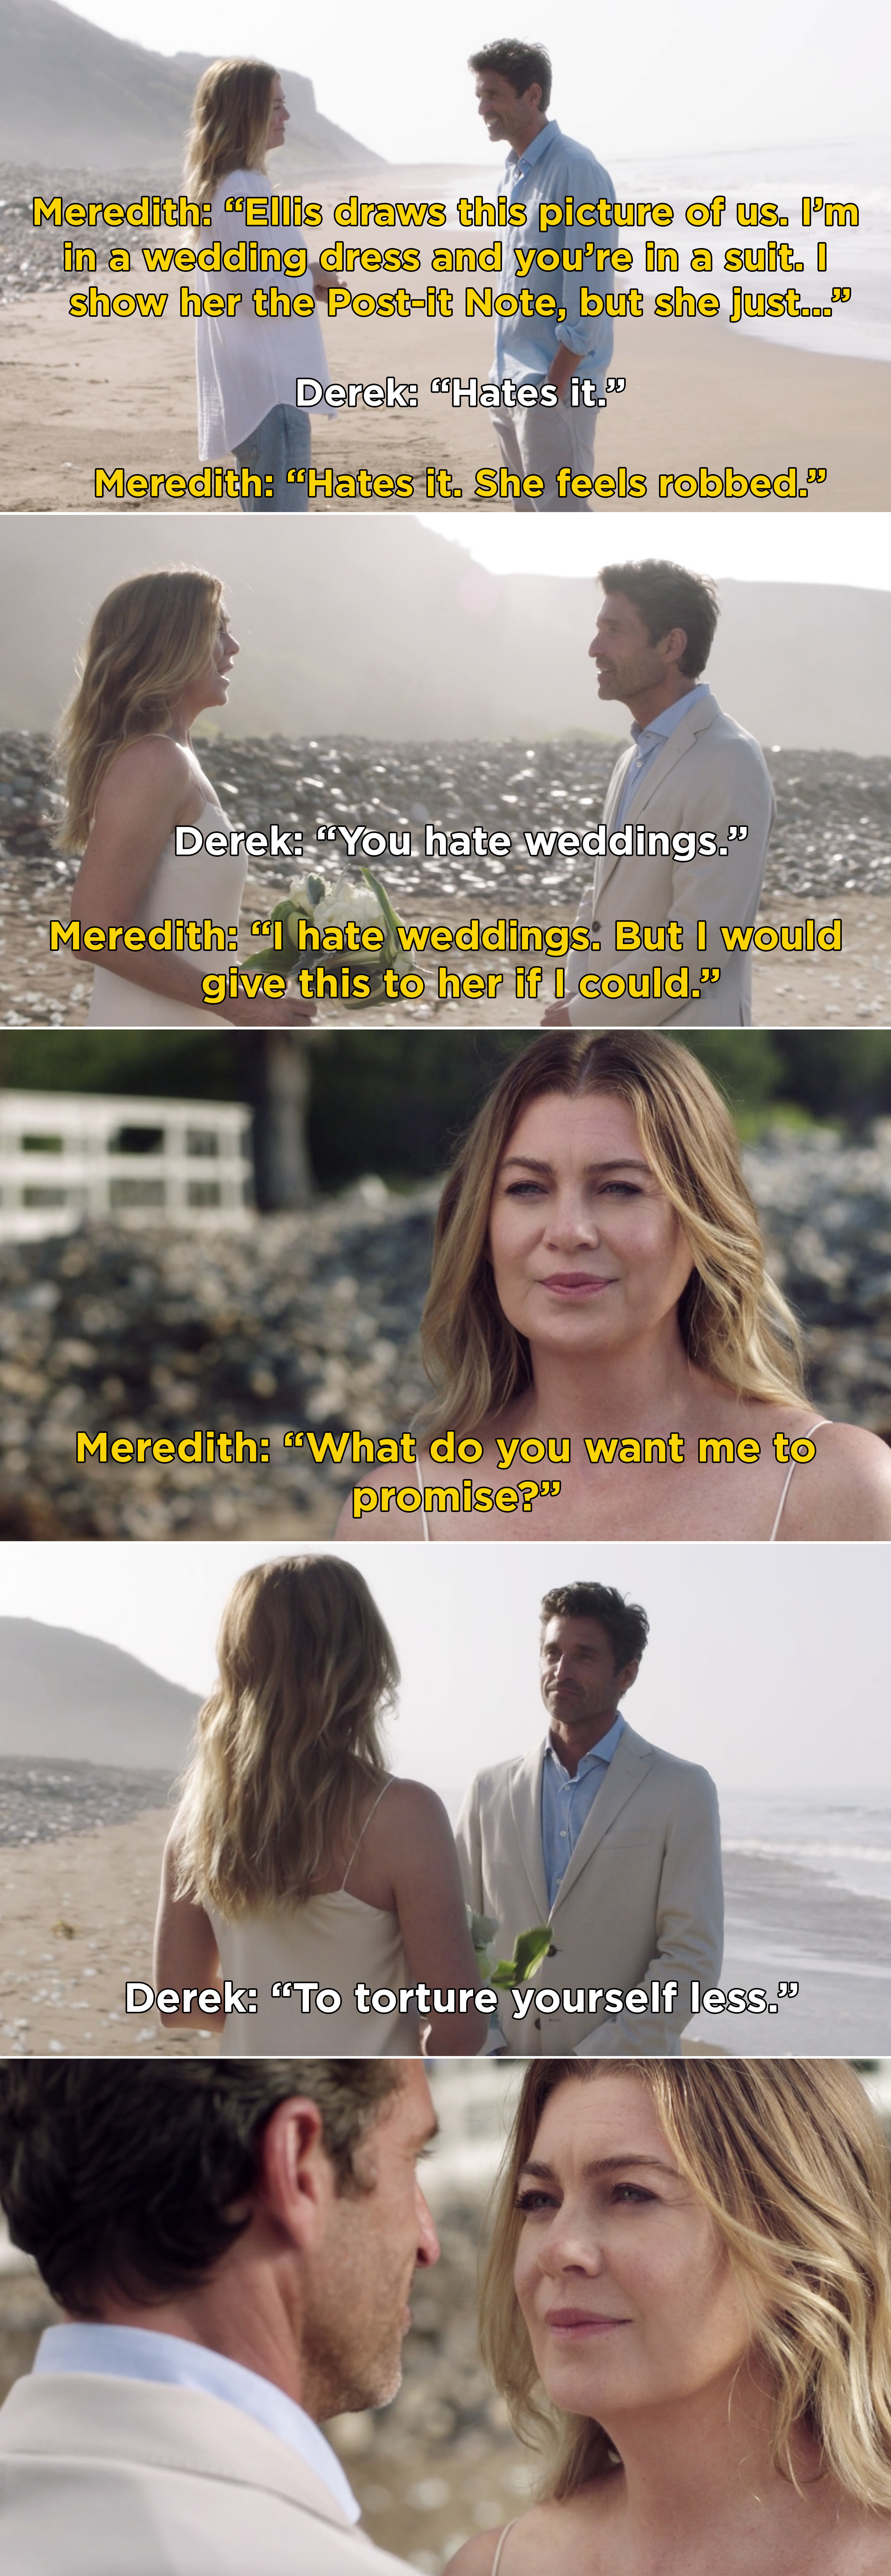 Meredith telling Derek that Ellis draws a picture of them in a wedding dress and suit, and then the two of them wearing that on the beach